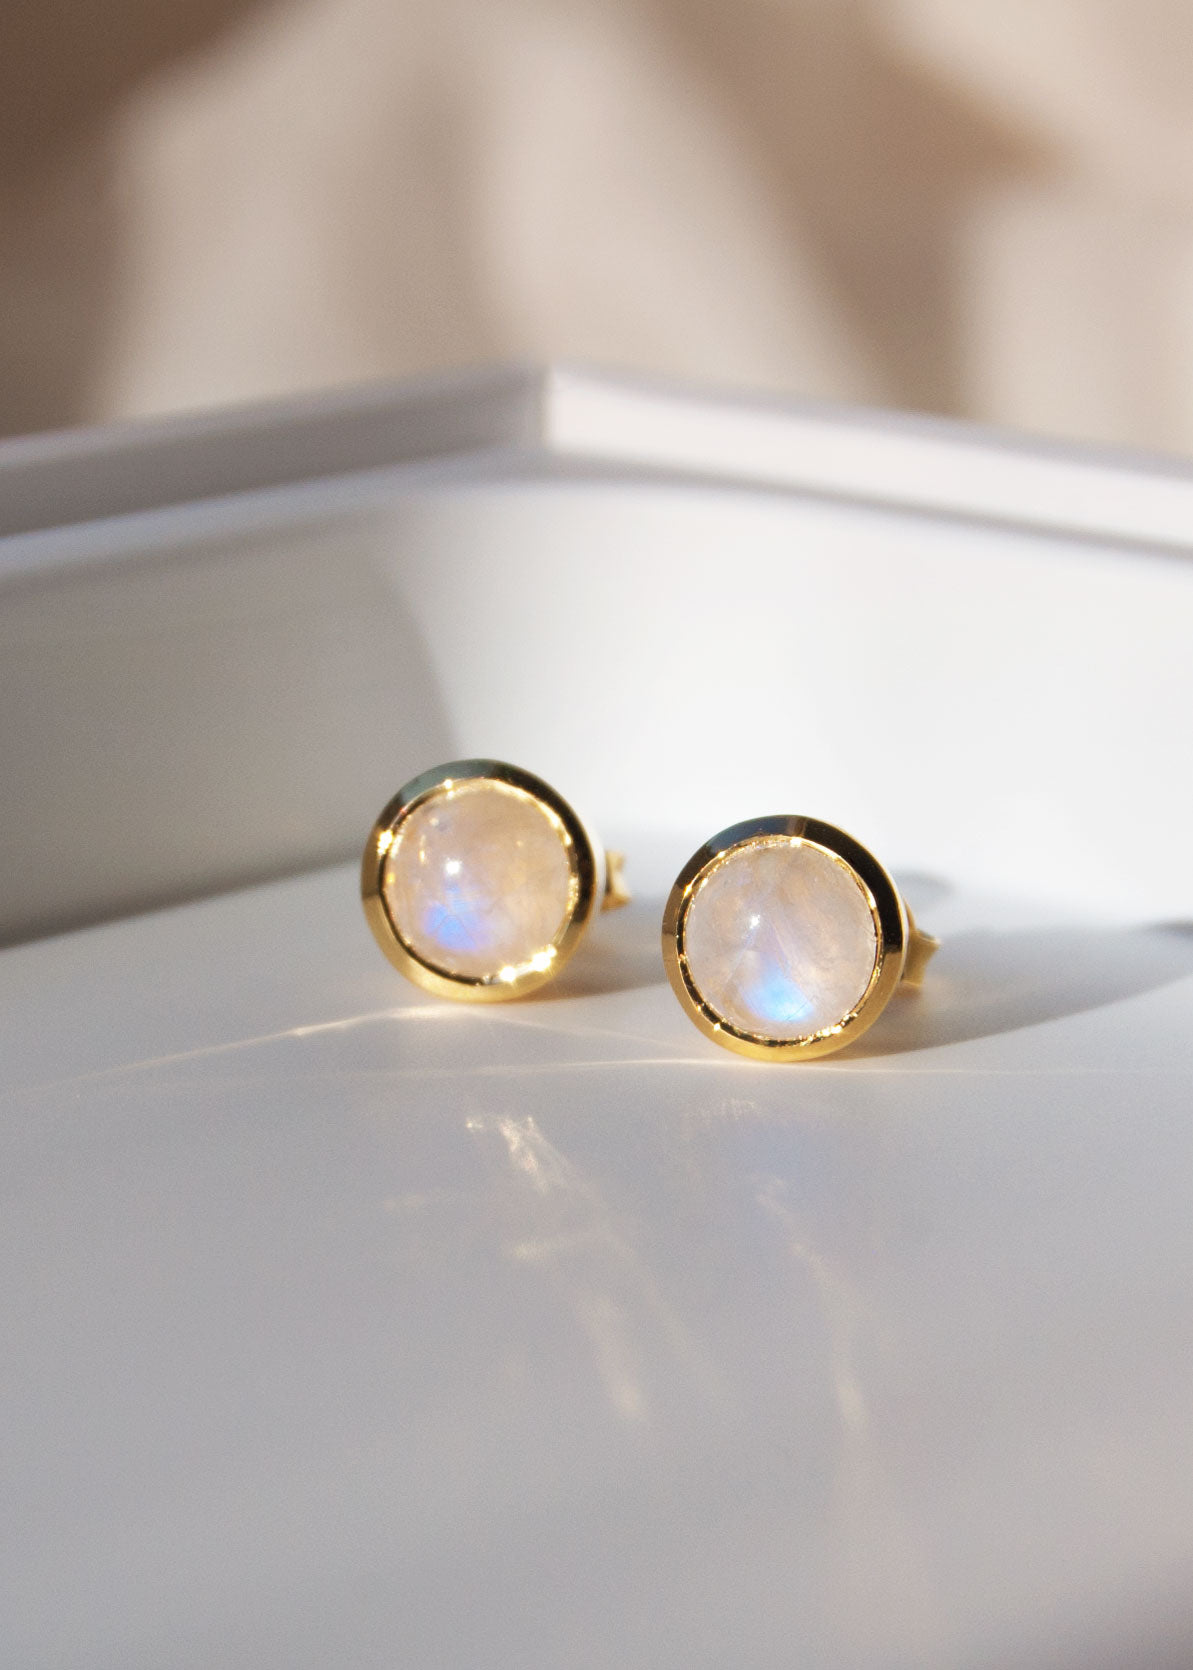 Moonstone Studs in 18k Gold Vermeil Christmas gifts for her